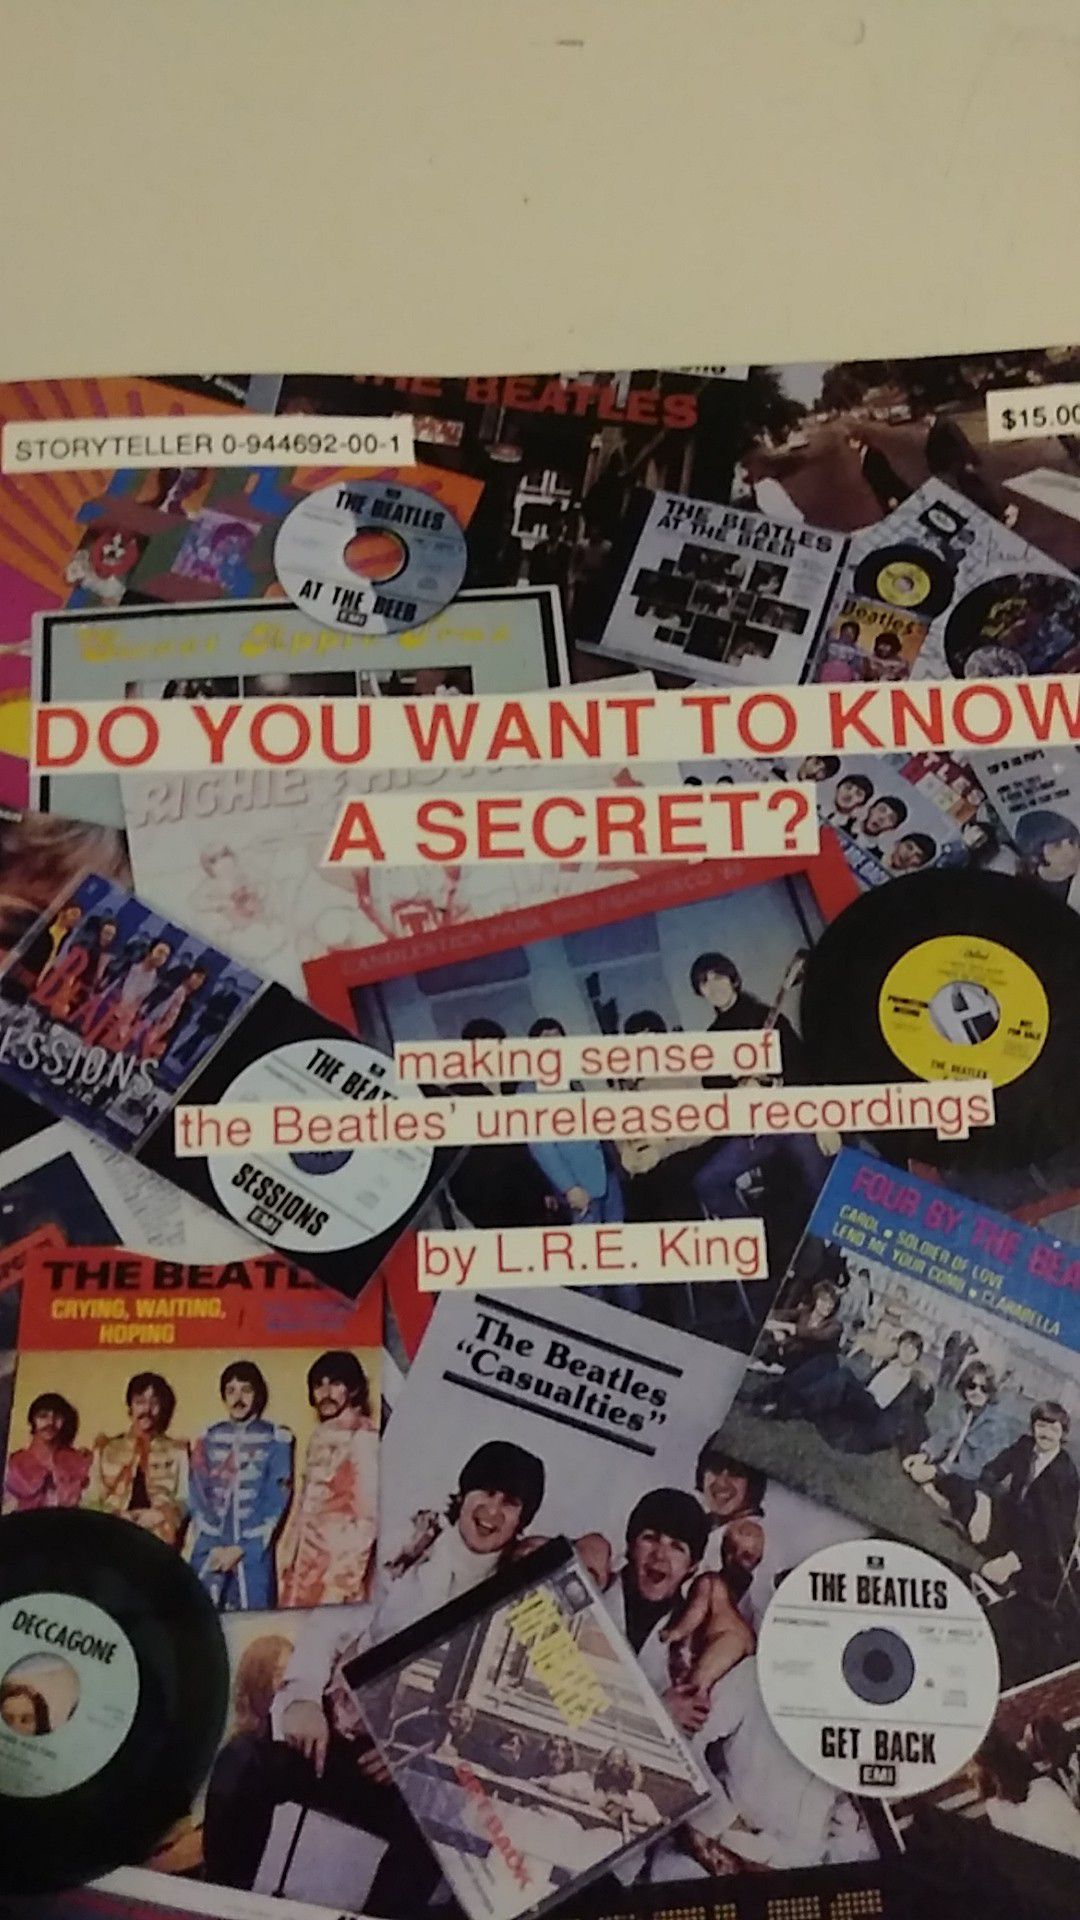 Do YOU WANT TO KNOW A SECRET??